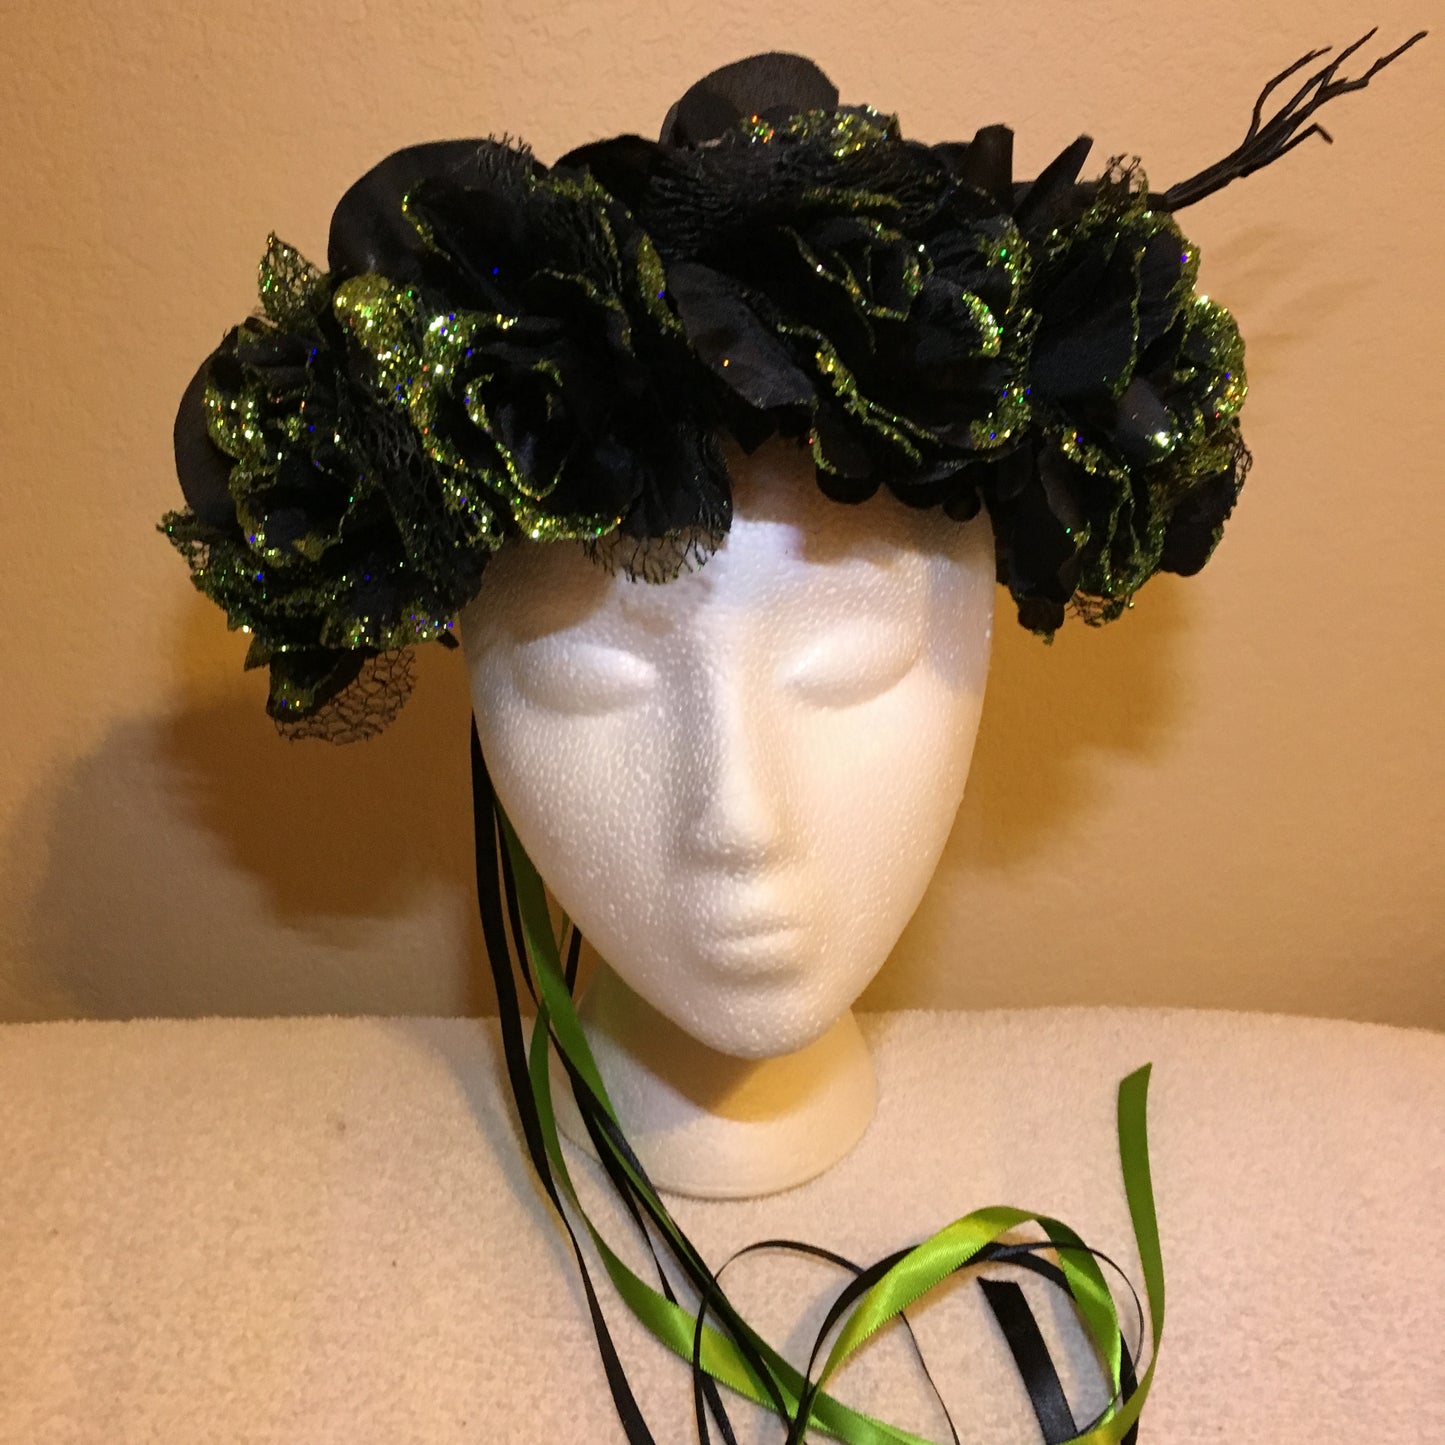 Large Wreath - Black roses w/ green sparkle